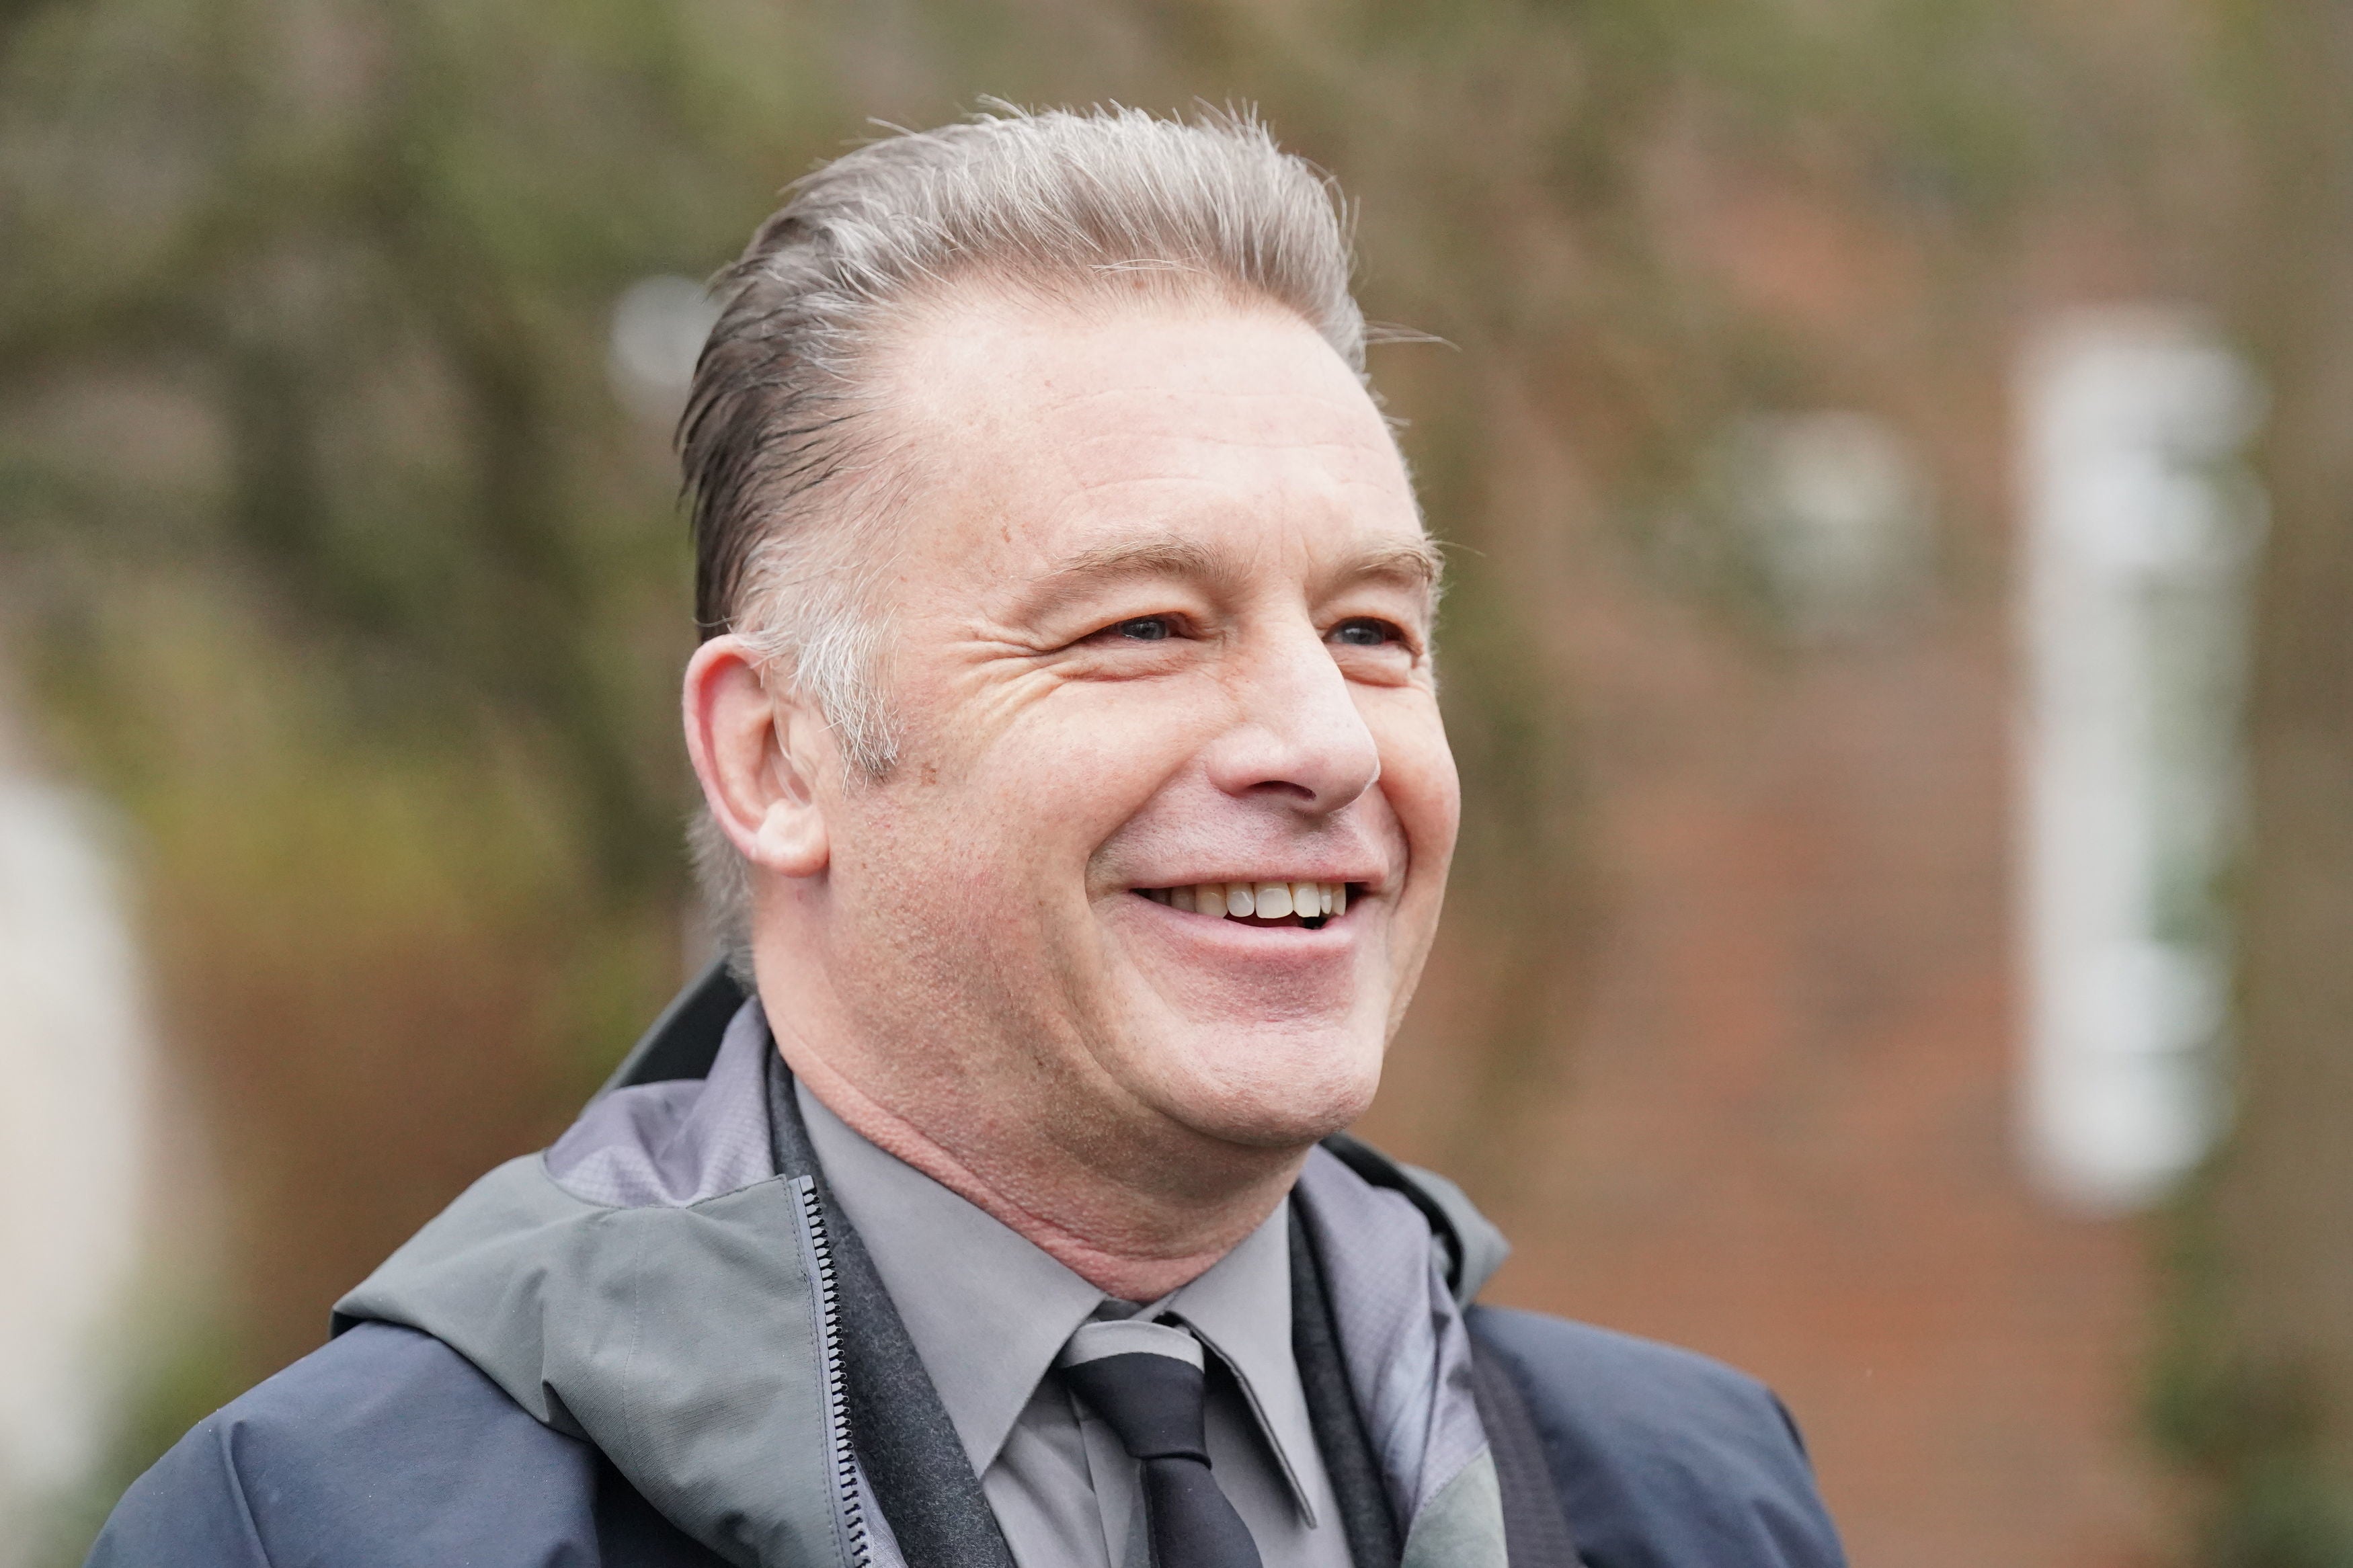 Chris Packham previously presented a Channel 4 documentary ‘Is It Time To Break the Law’ that questioned how far people should go to address the climate crisis